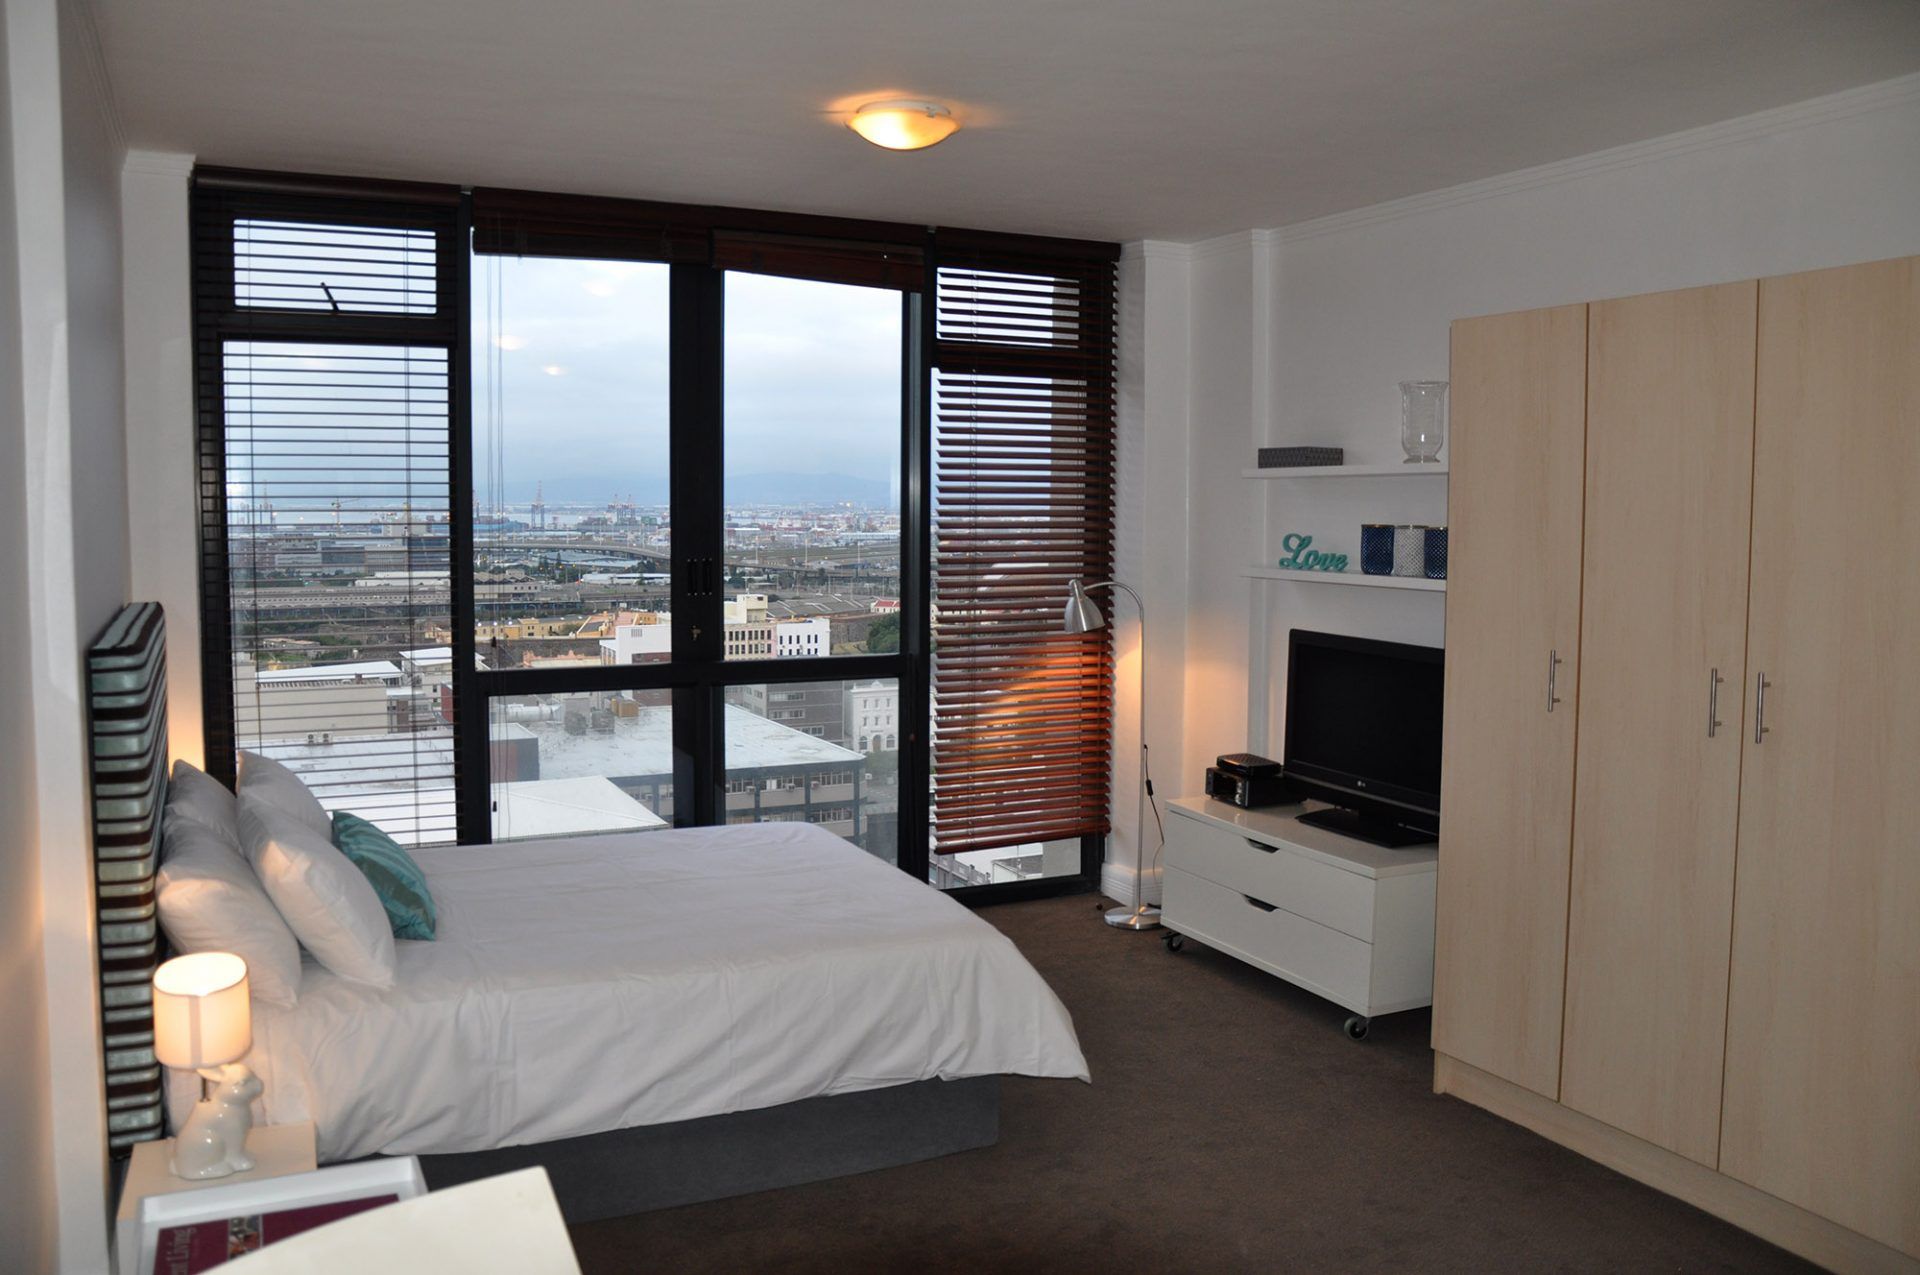 Photo 2 of Cityscapes Midtown Studio accommodation in City Centre, Cape Town with 1 bedrooms and 1 bathrooms